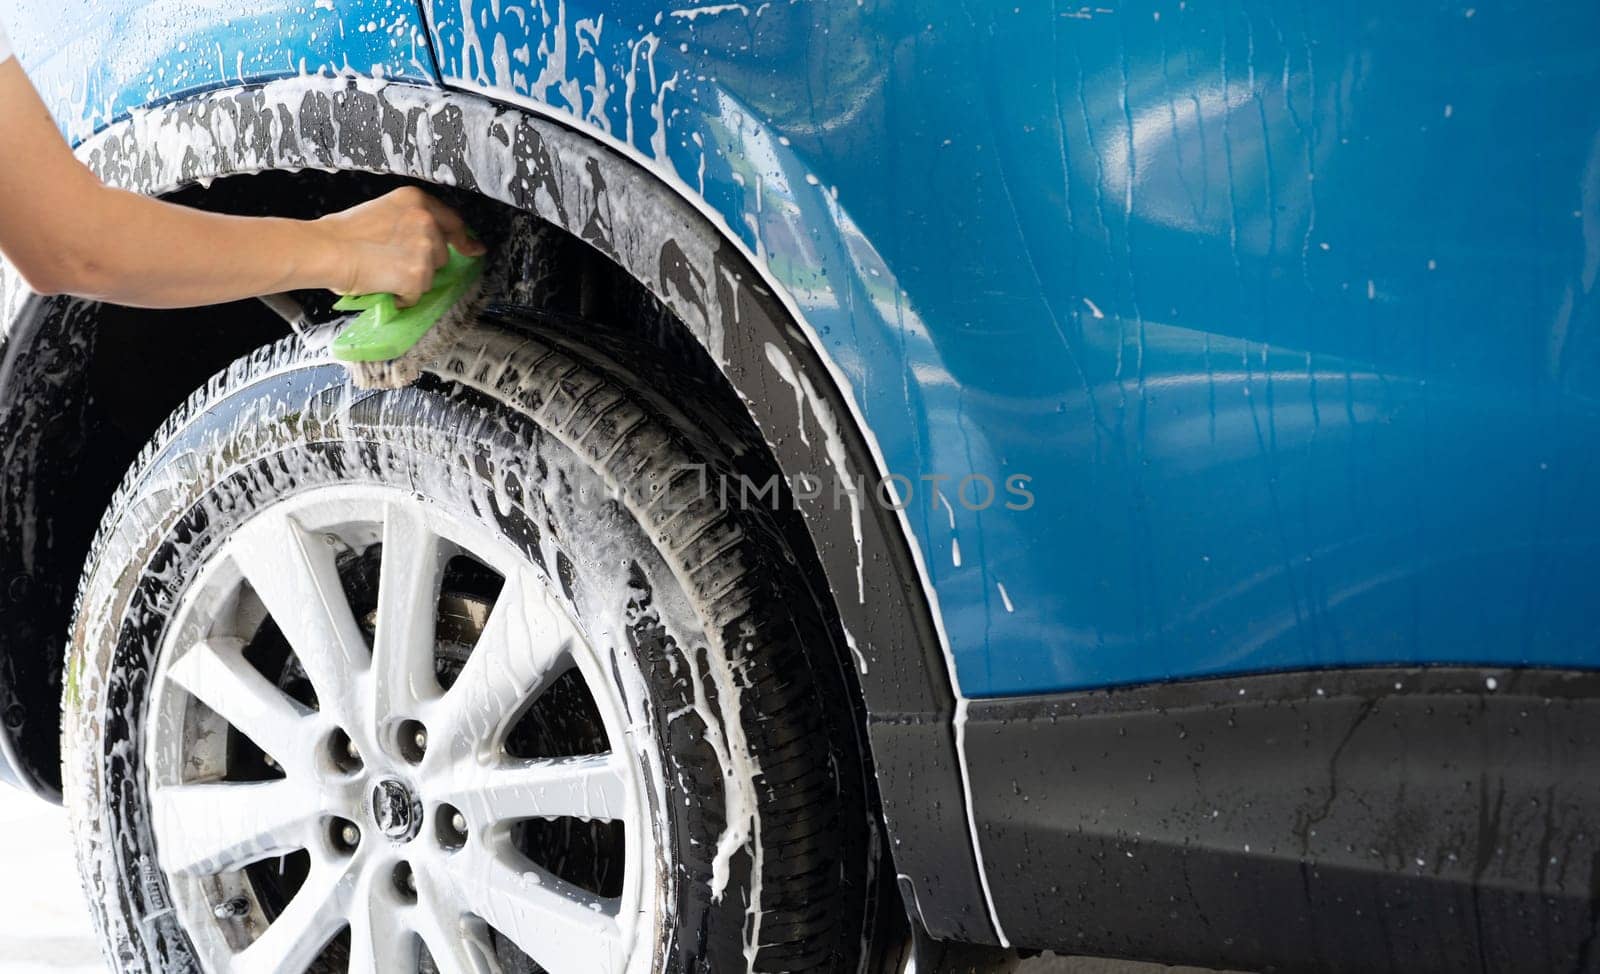 A person is washing a car tire with a green brush. Tire is covered in water and soap. Blue car wash with white soap foam. Auto care service. Car cleaning service concept. Vehicle cleaning service.